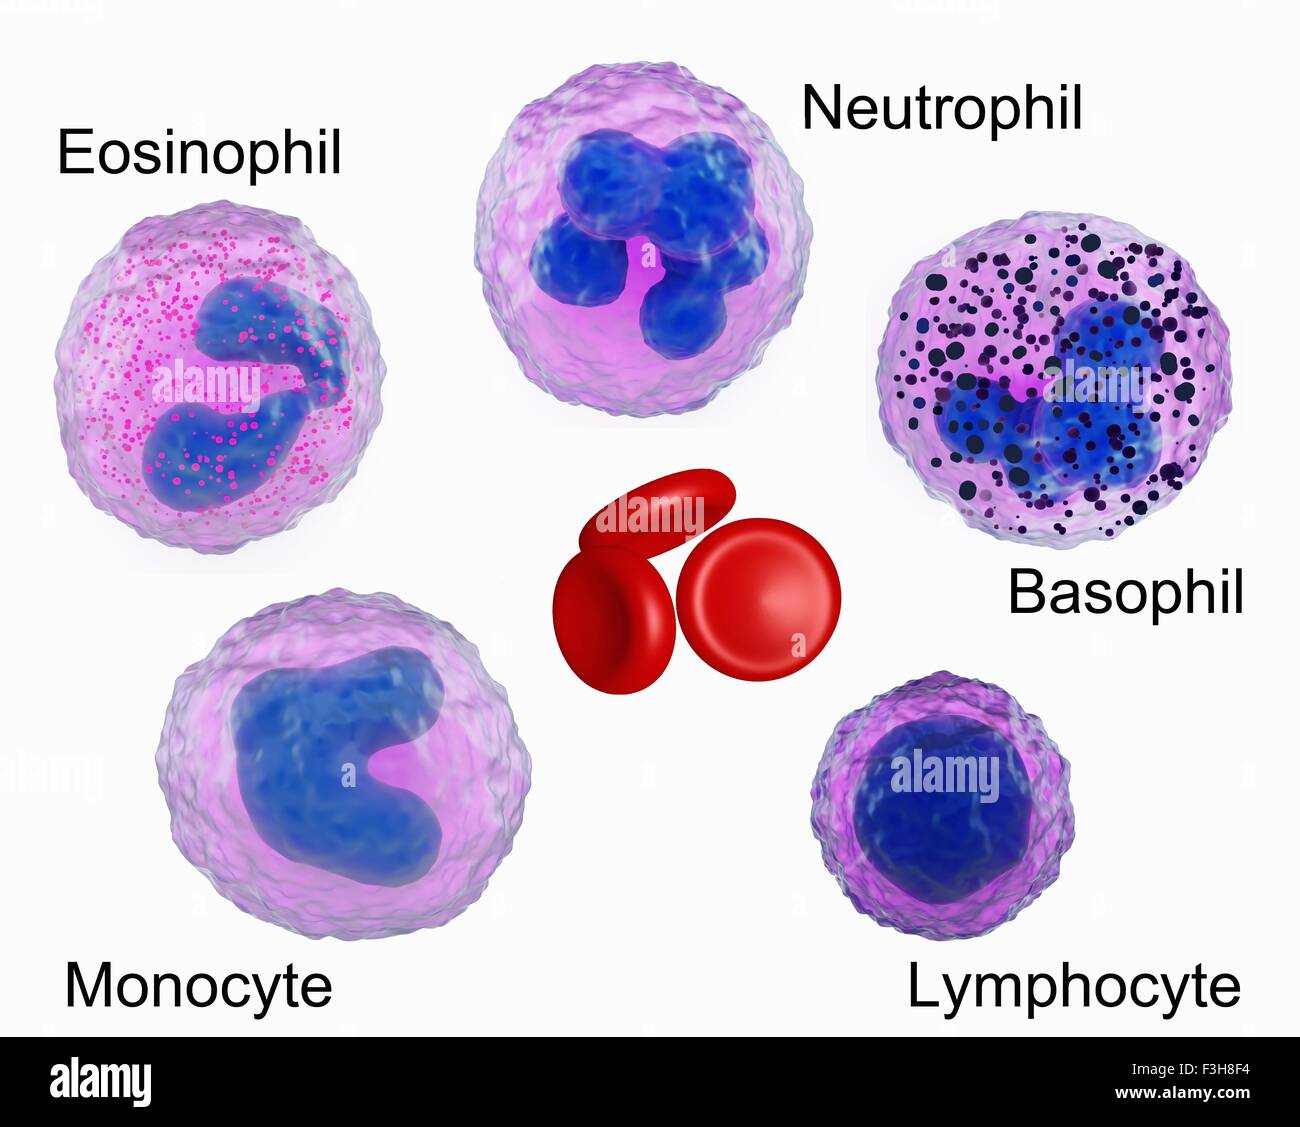 Illustration of blood cells, showing an eosinophil, neutrophil, basophil, monocyte, lymphocyte and red blood cells Stock Photo